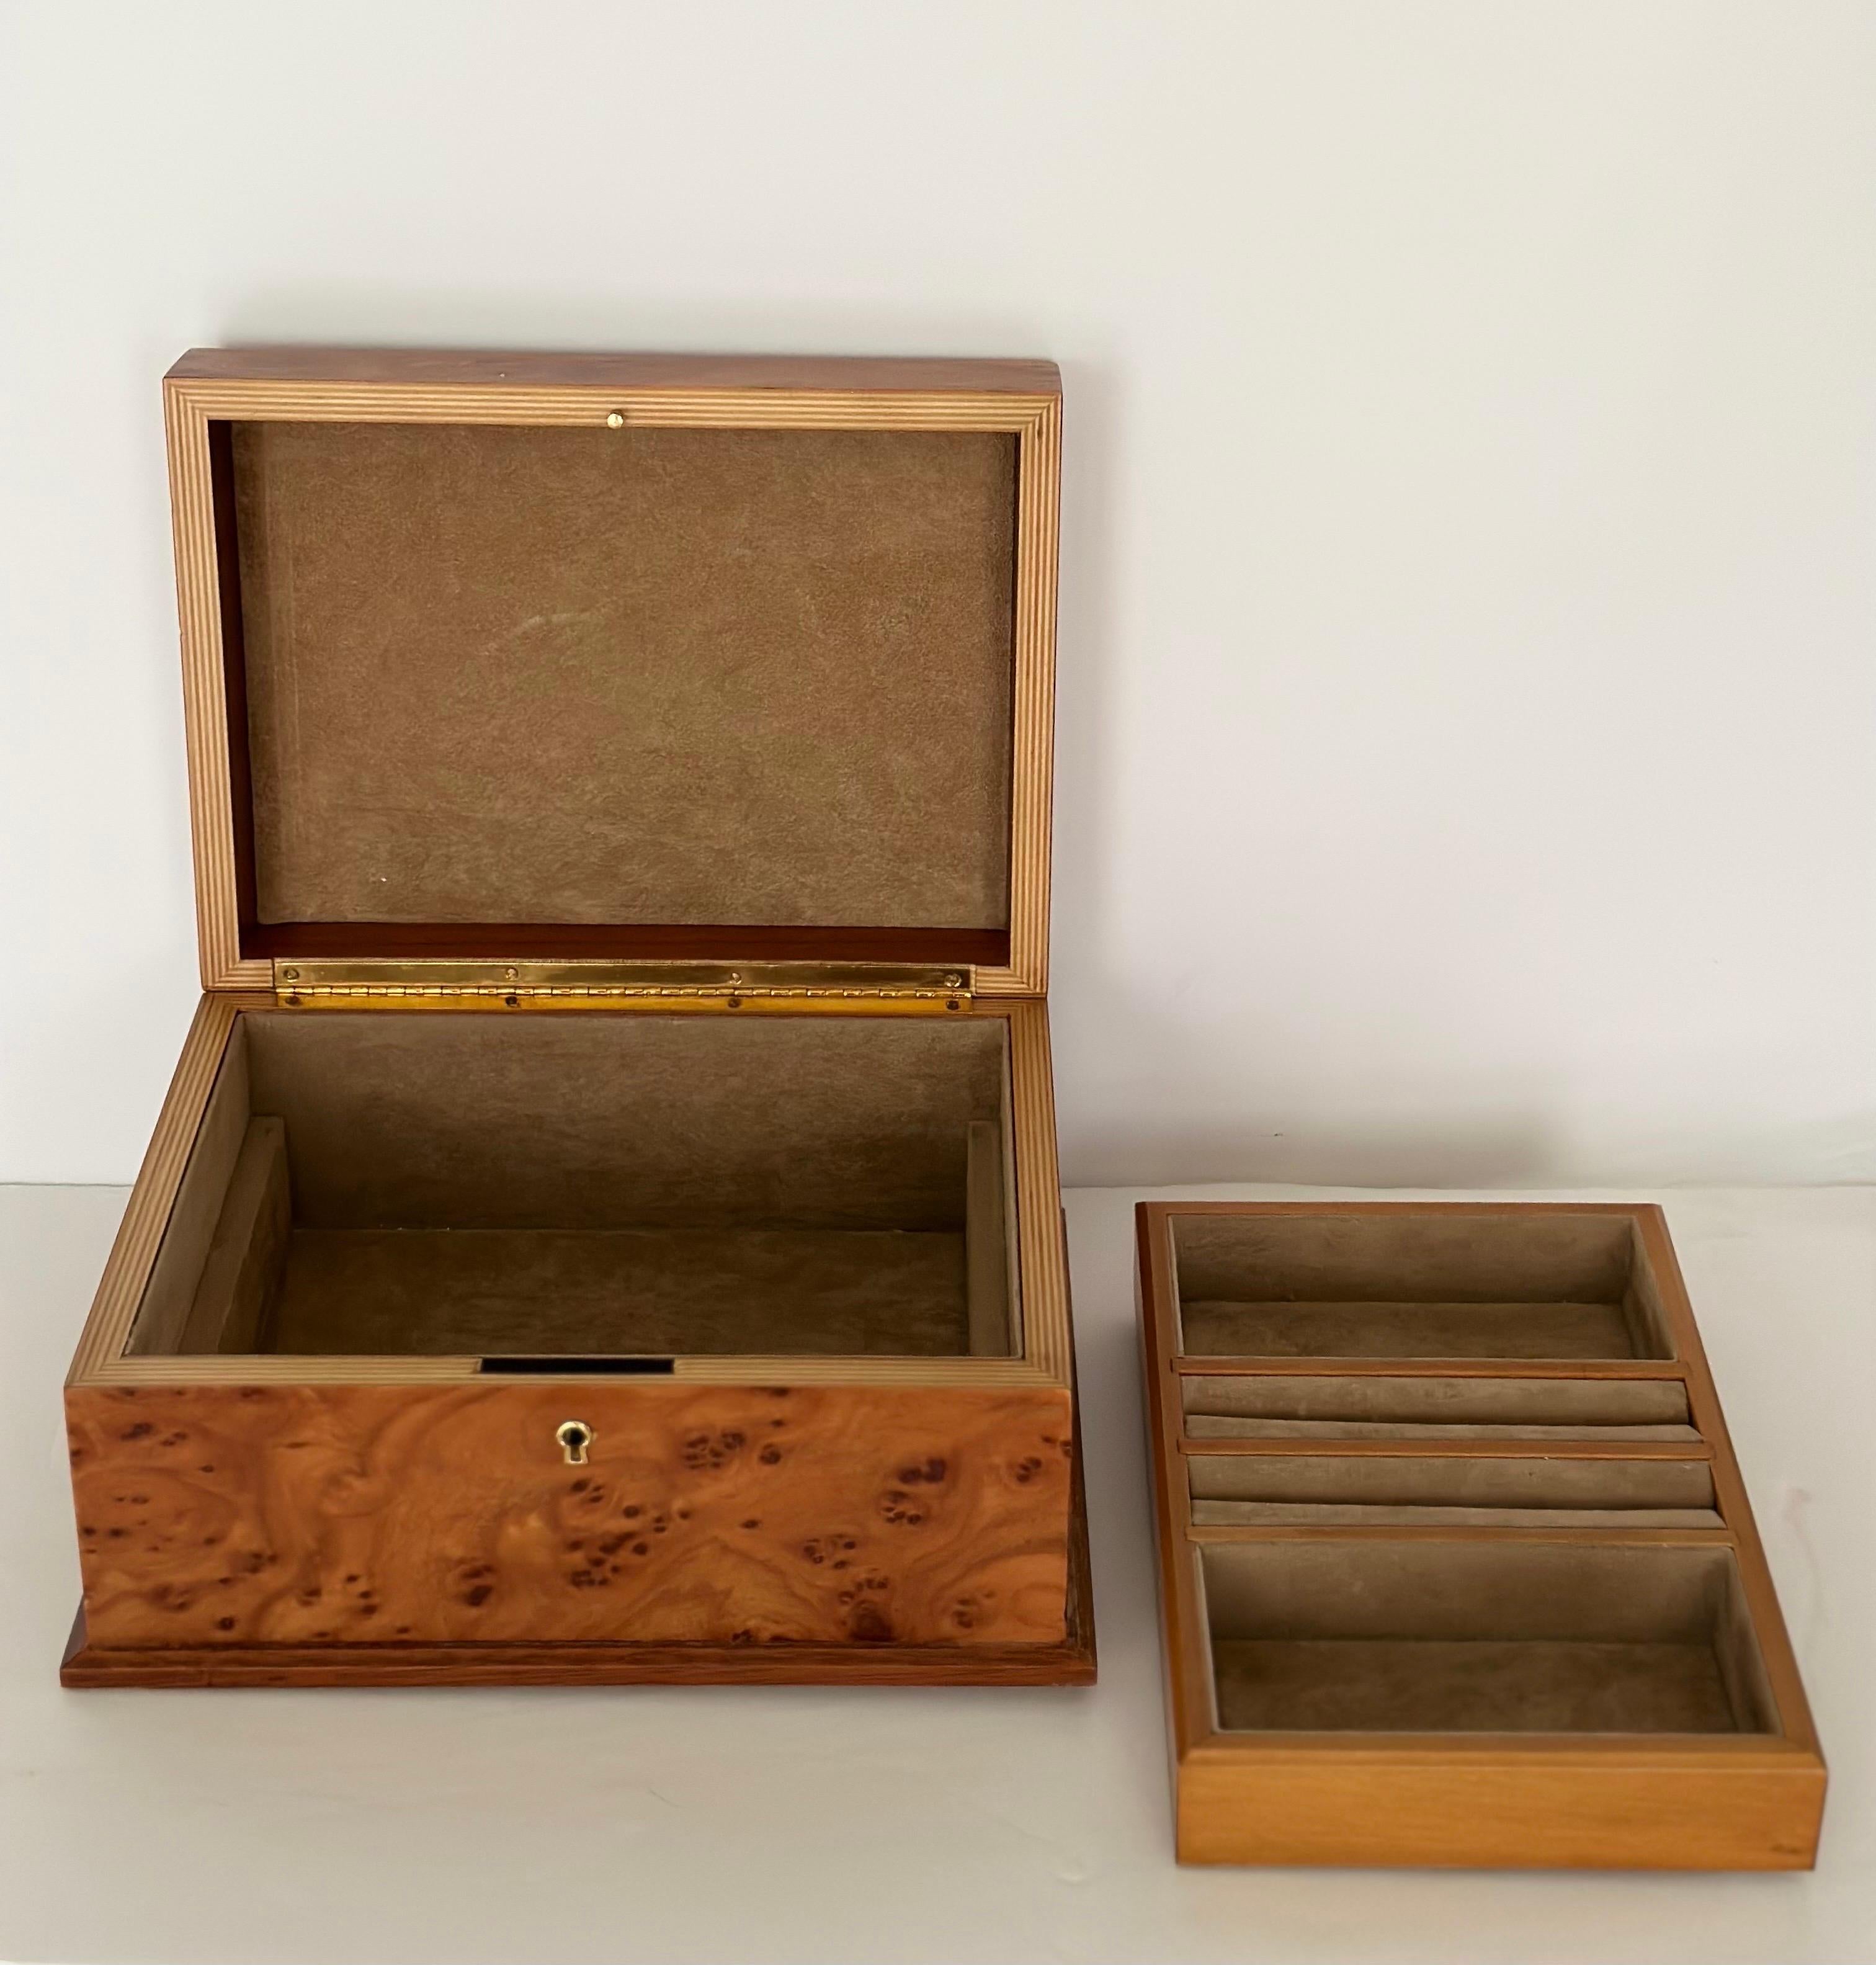 We are very pleased to offer a delightful burlwood jewelry box, circa the 1970s.  Crafted with care, it serves as both a functional storage solution and a visually appealing piece.  As you lift the lid, you'll discover a well-designed interior that